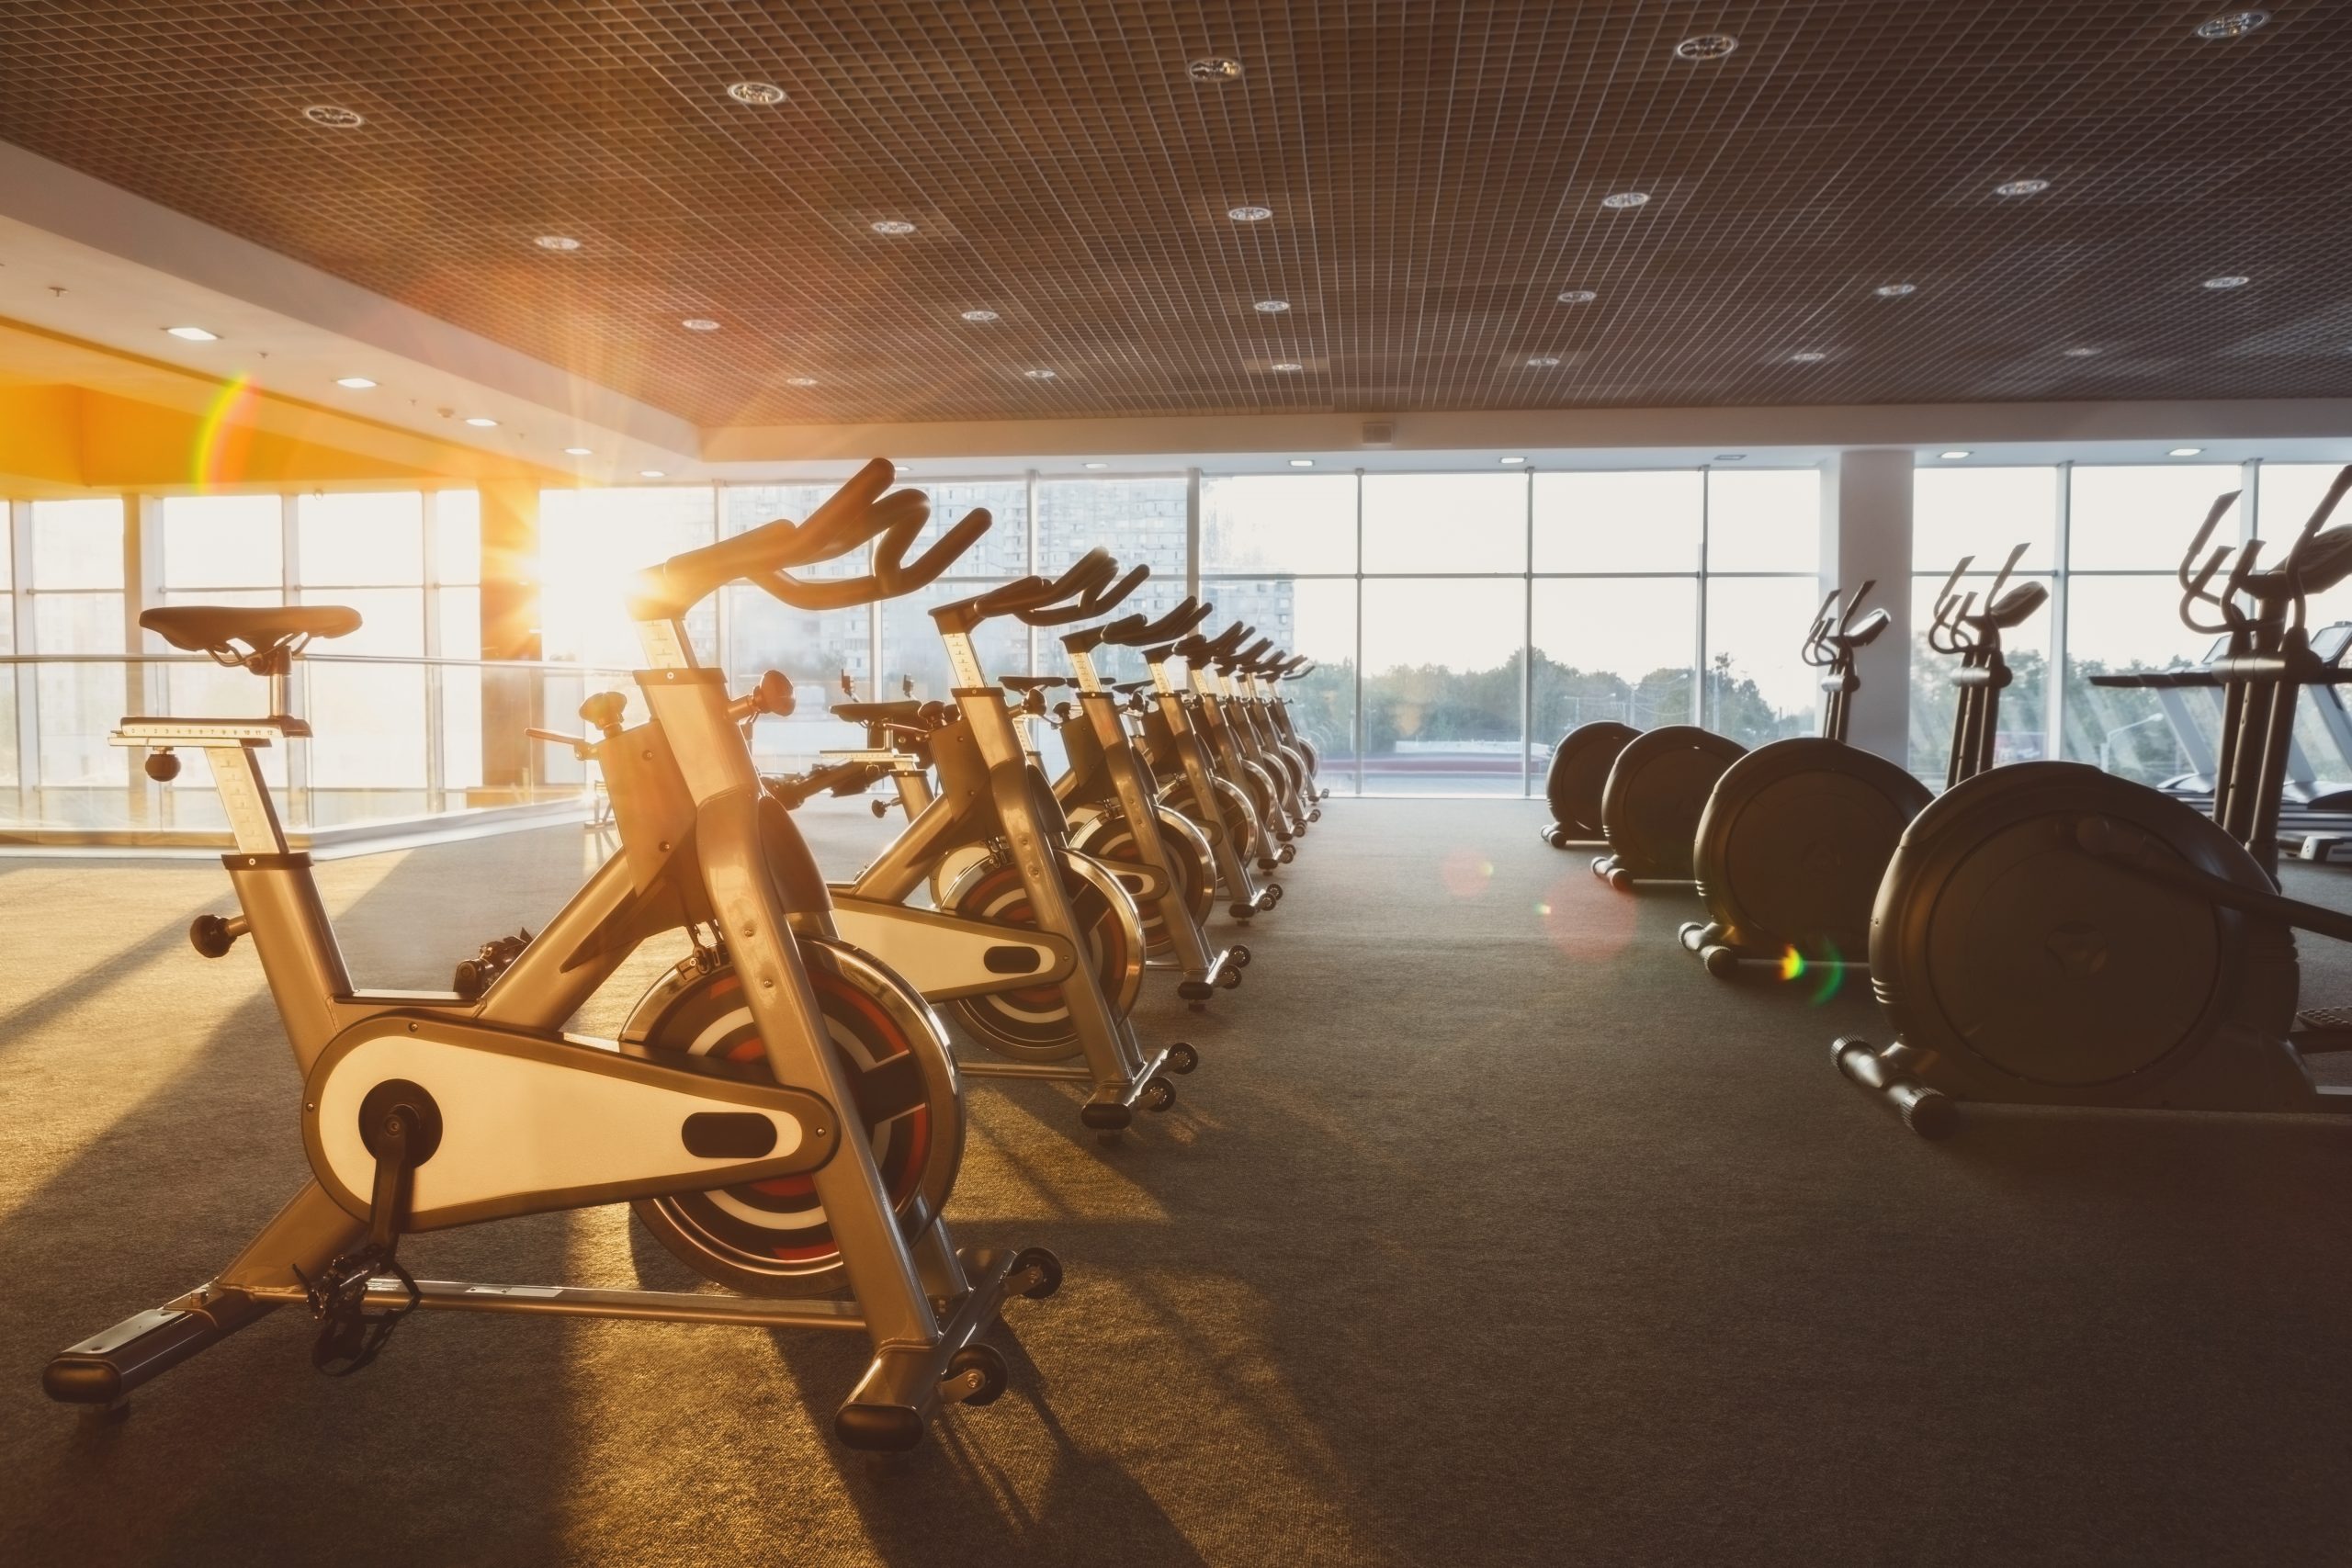 Modern gym interior with equipment. Fitness club with training exercise bikes, backlight in evening sunlight.